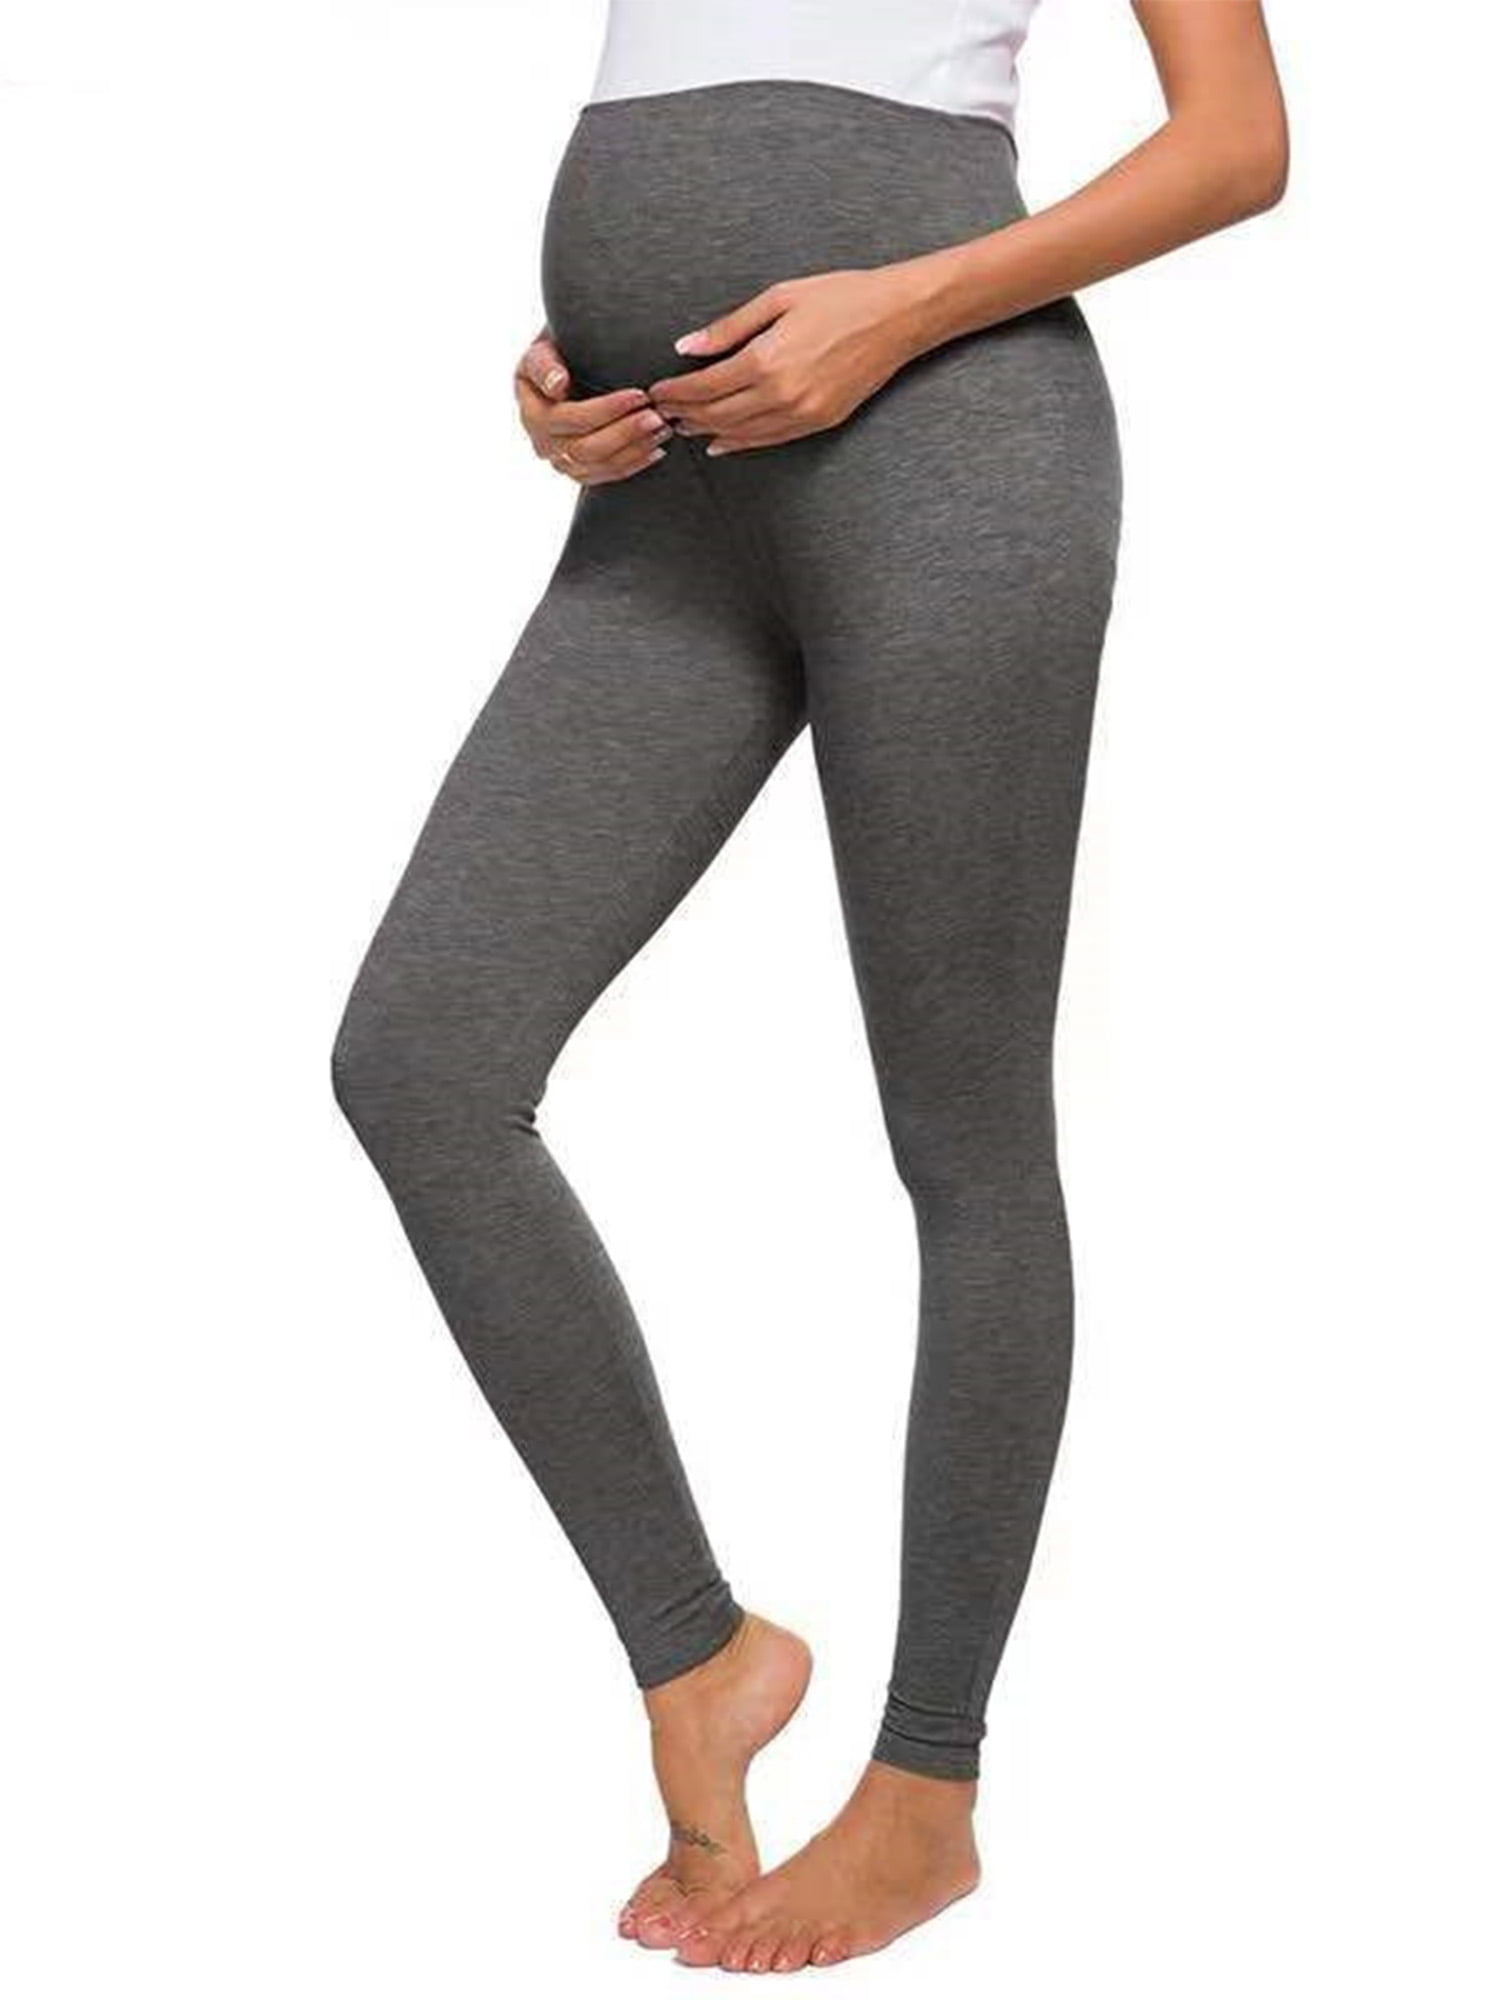 Women Maternity Compression Leggings Over The Belly Full Length Pregnancy Pants